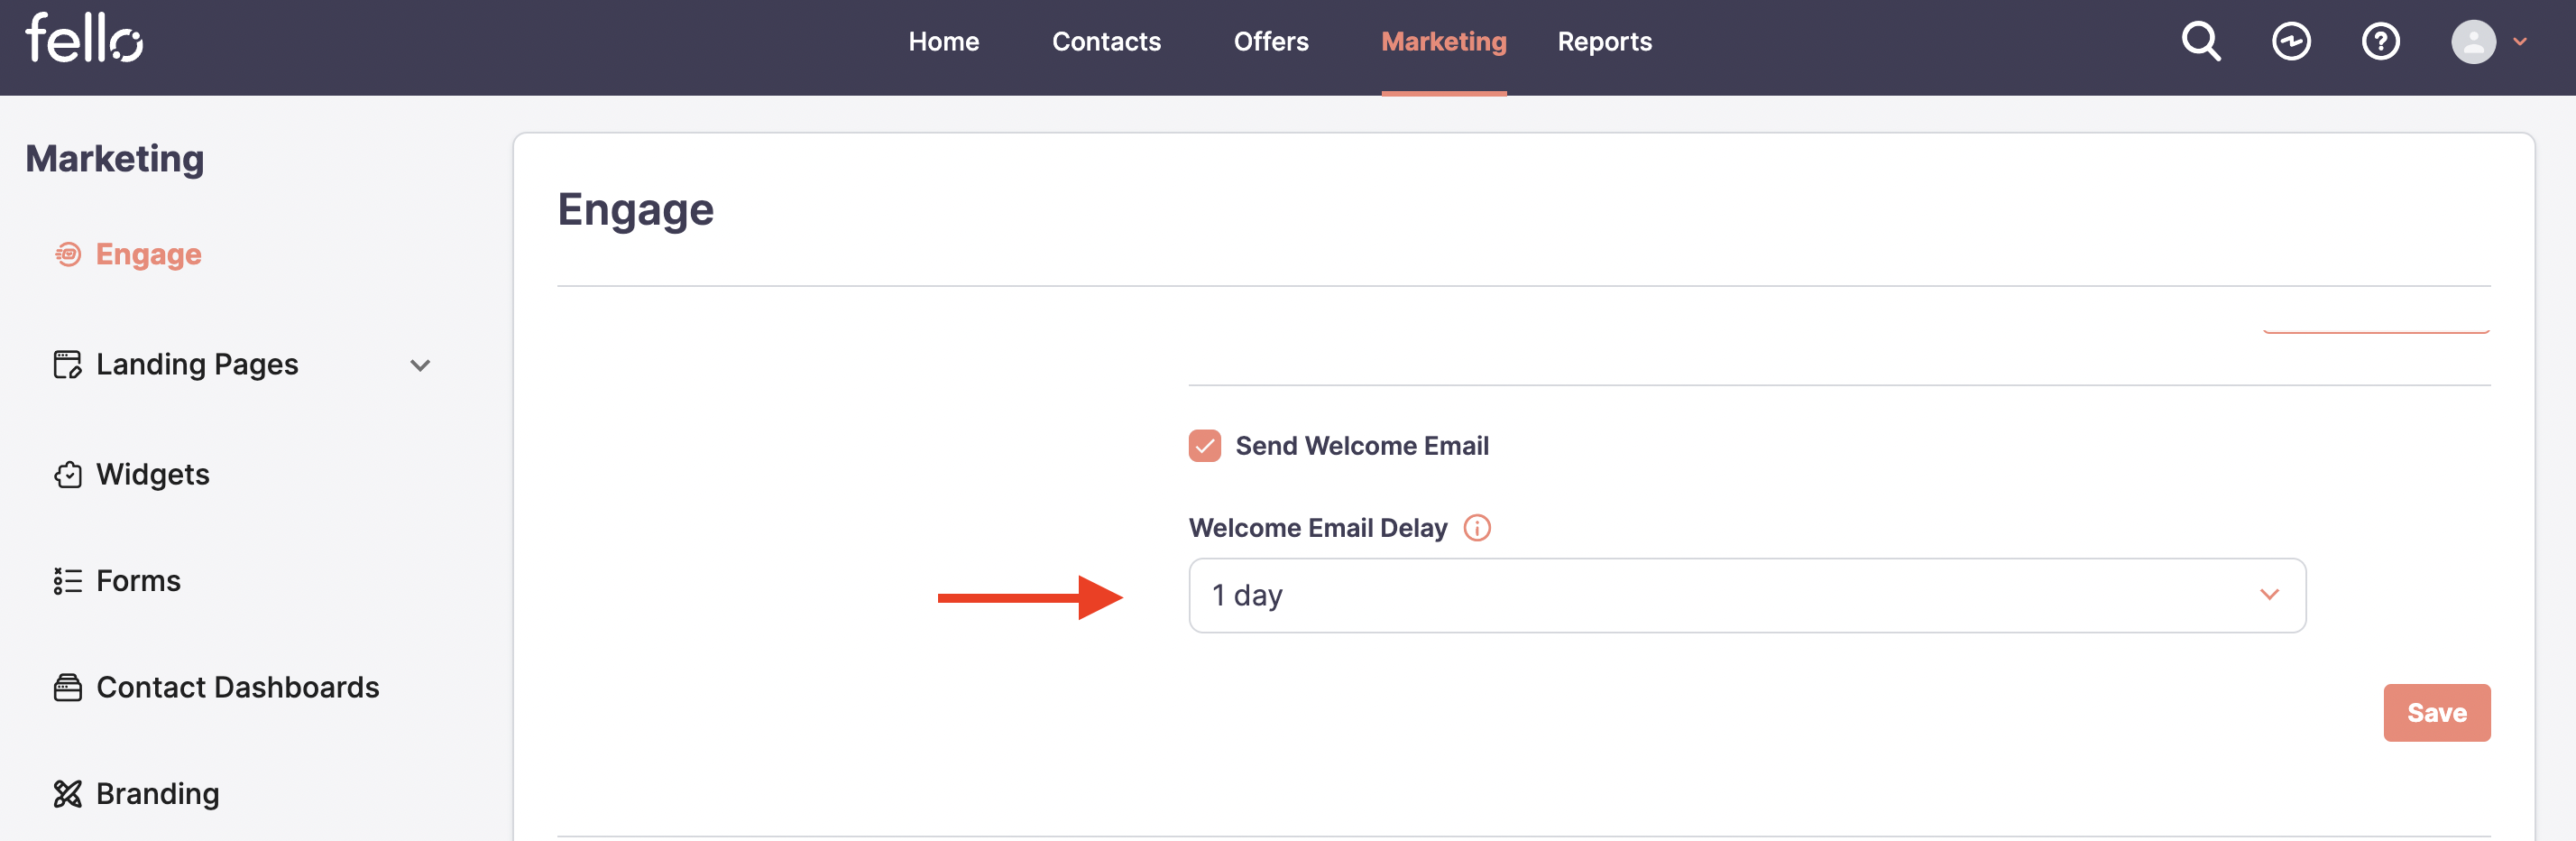 Select the welcome email delay from the dropdown